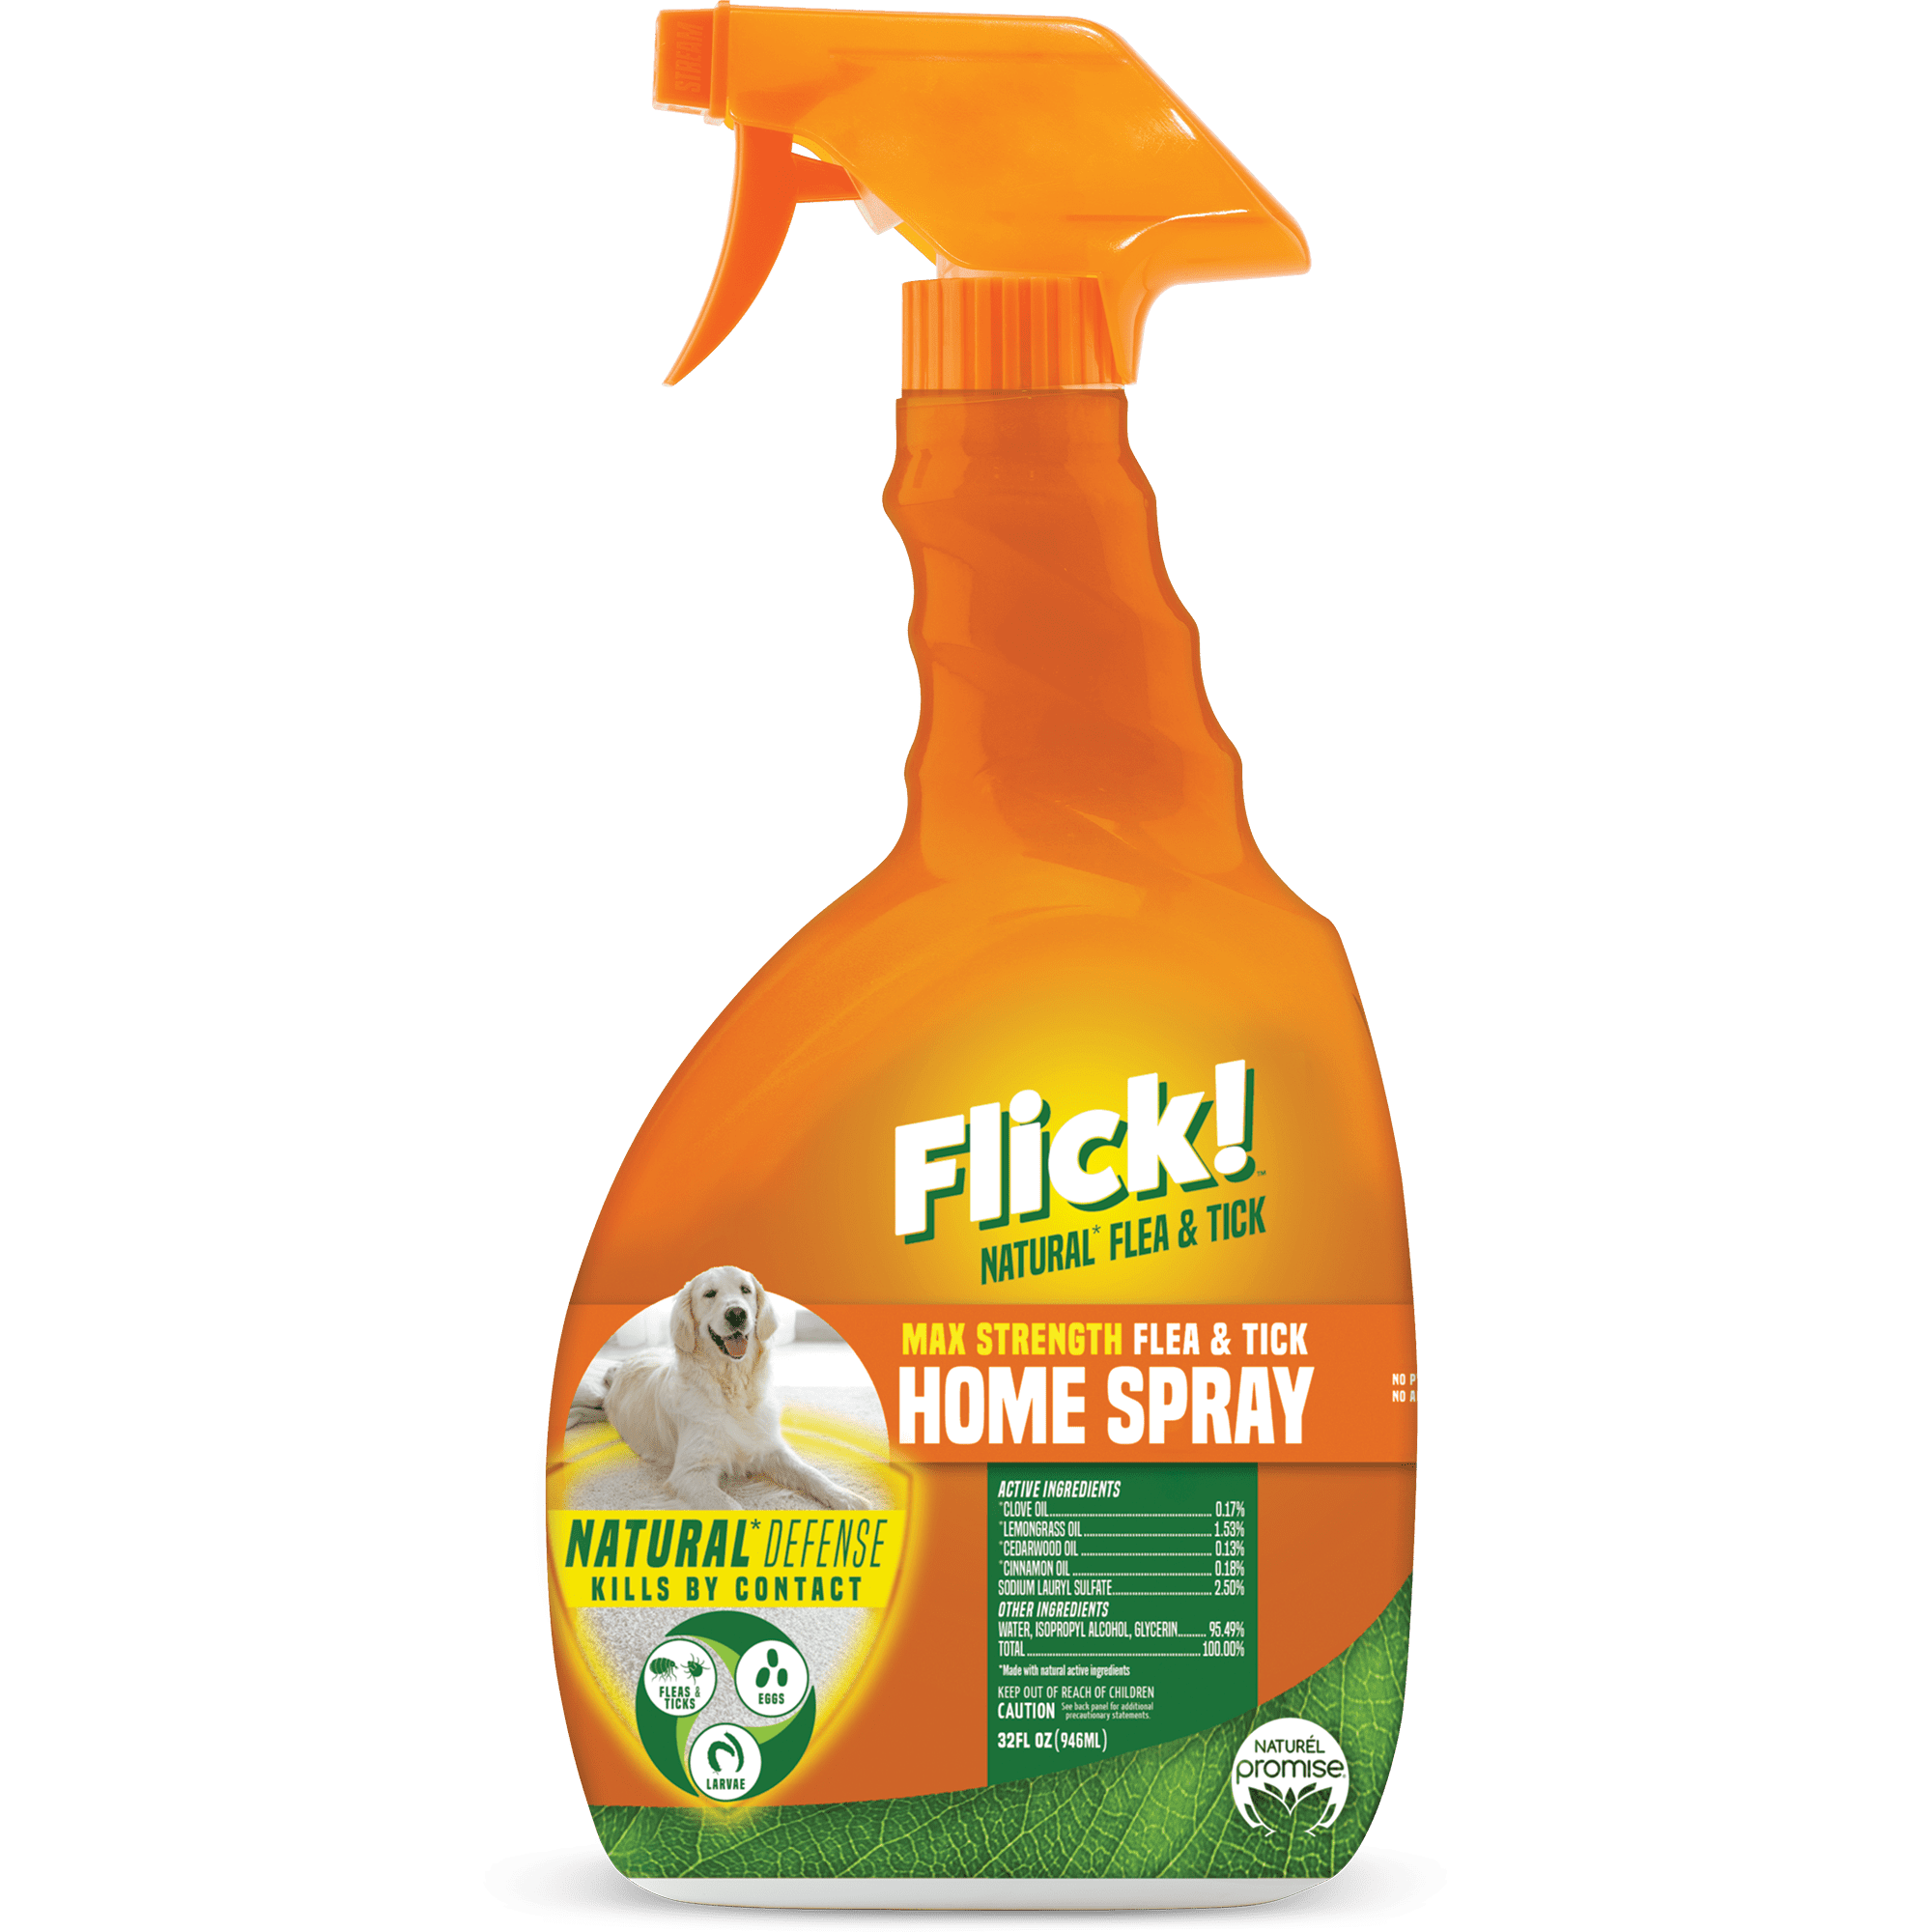 Naturel Promise Flick! Natural Flea and Tick Max Strength Home Spray for Dogs, 32oz